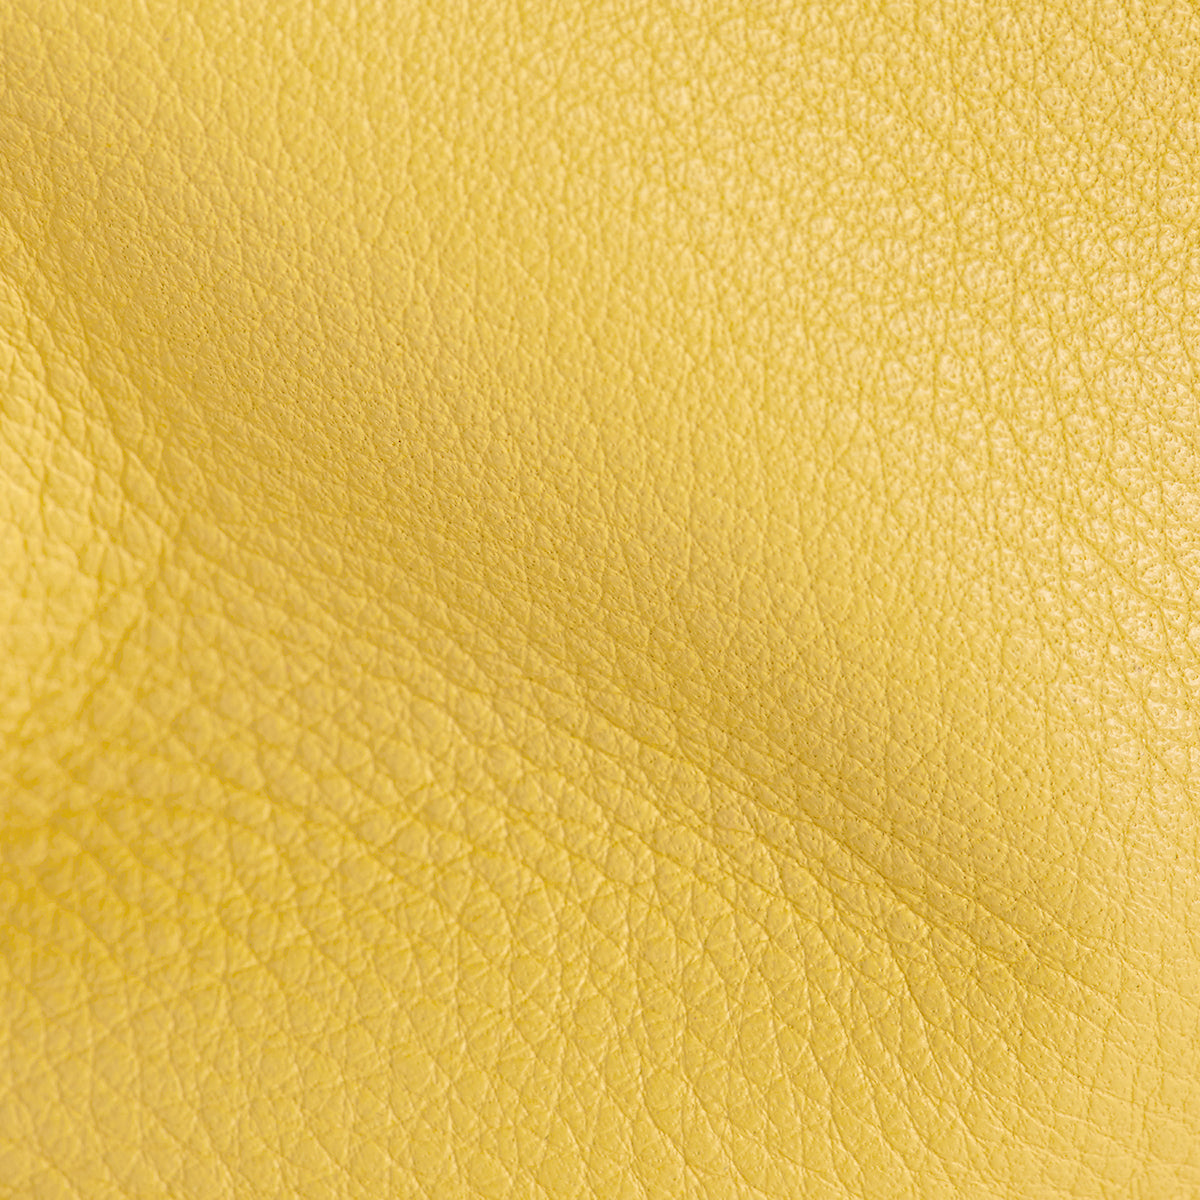 VIP-Med-Sacha-Yellow-Leather-Swatch